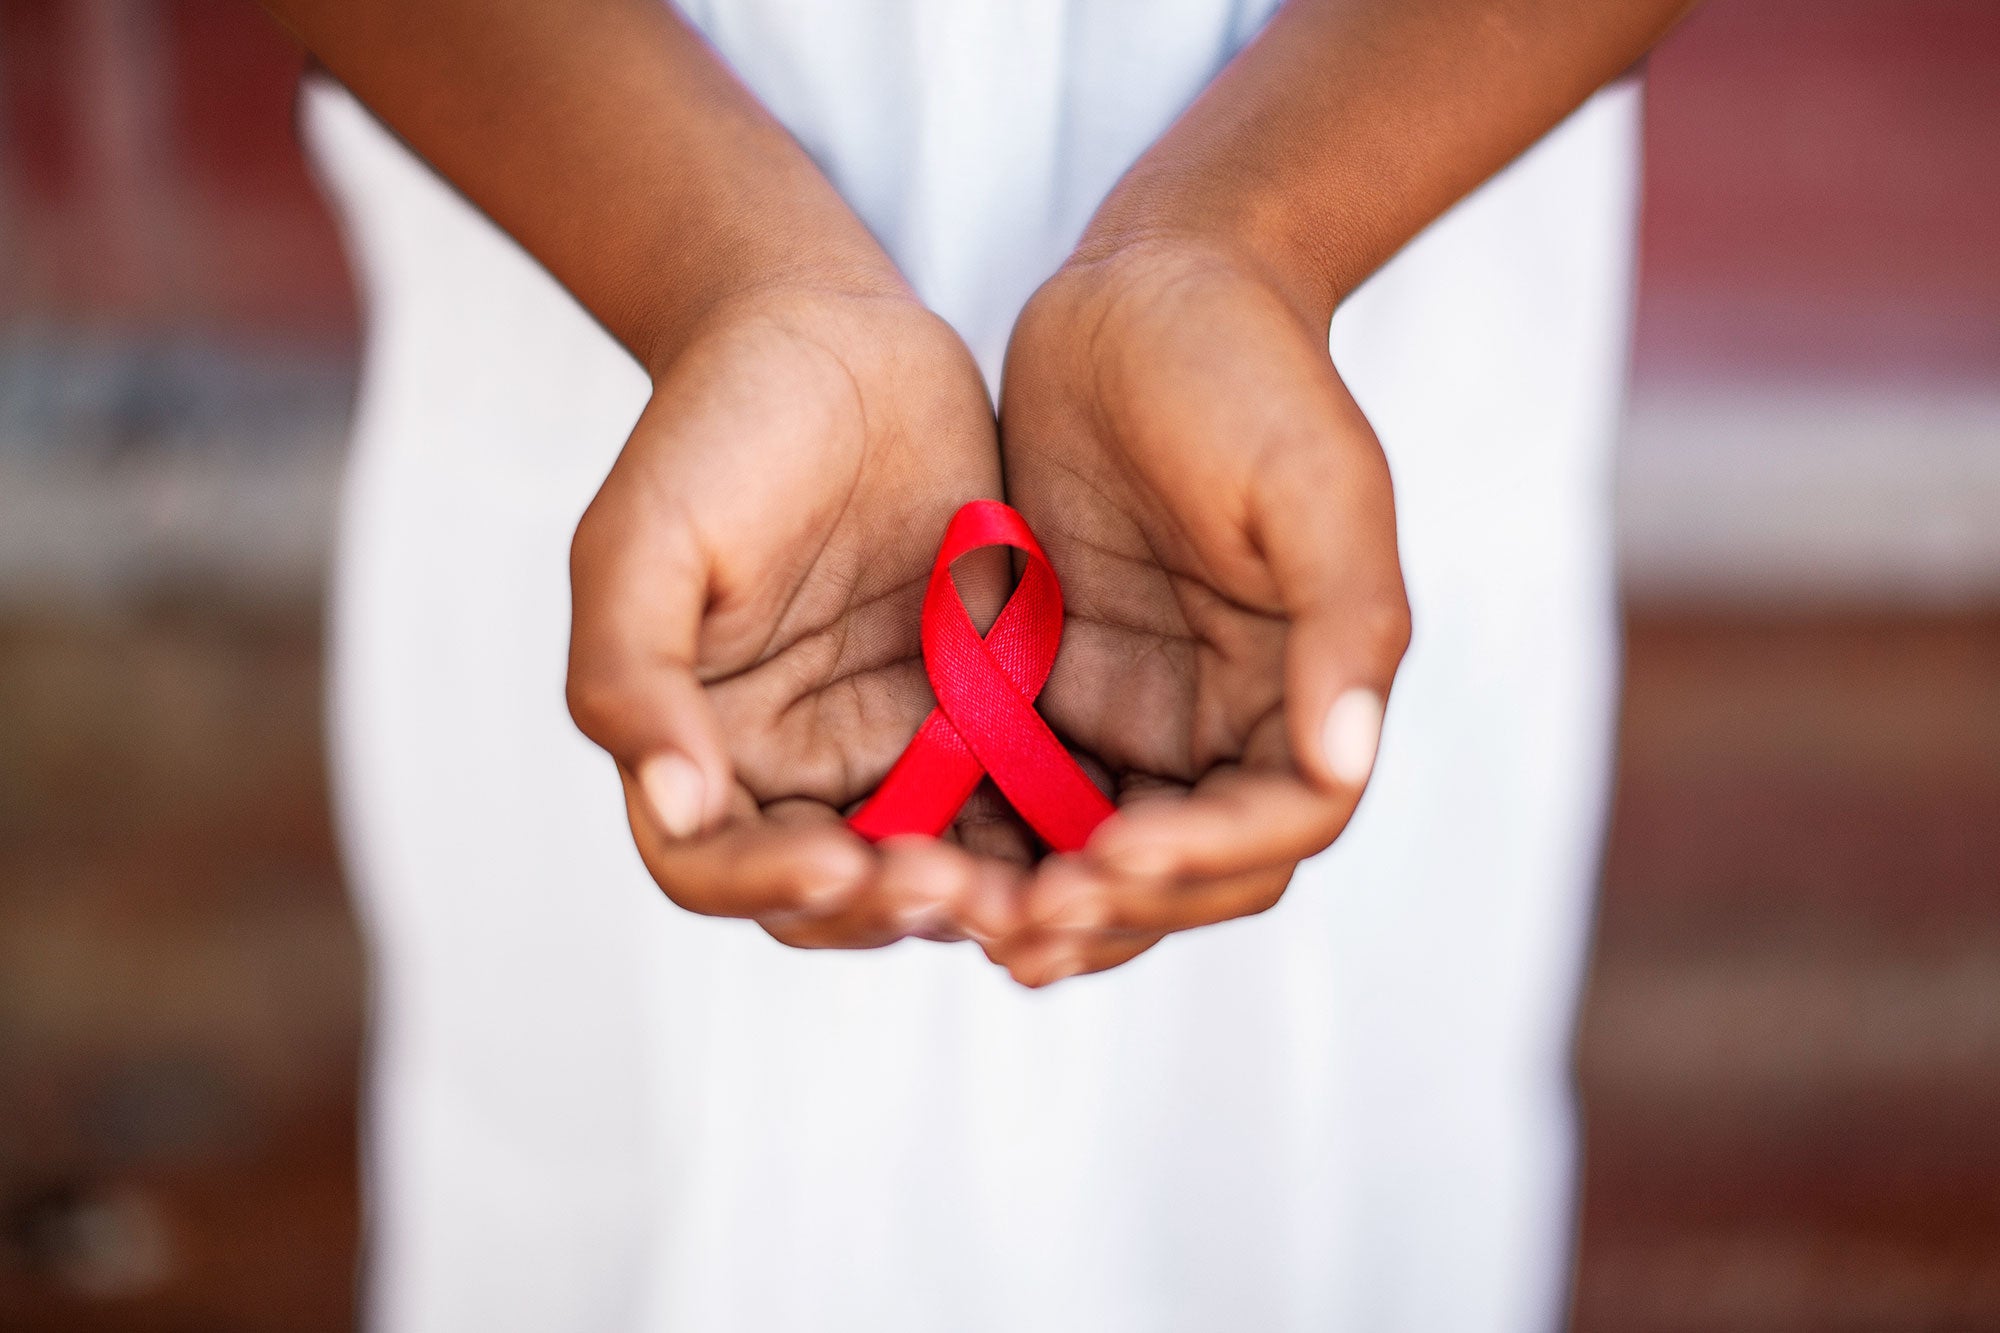 National Women And Girls HIV/AIDS Awareness Day: Let’s Talk About PrEP